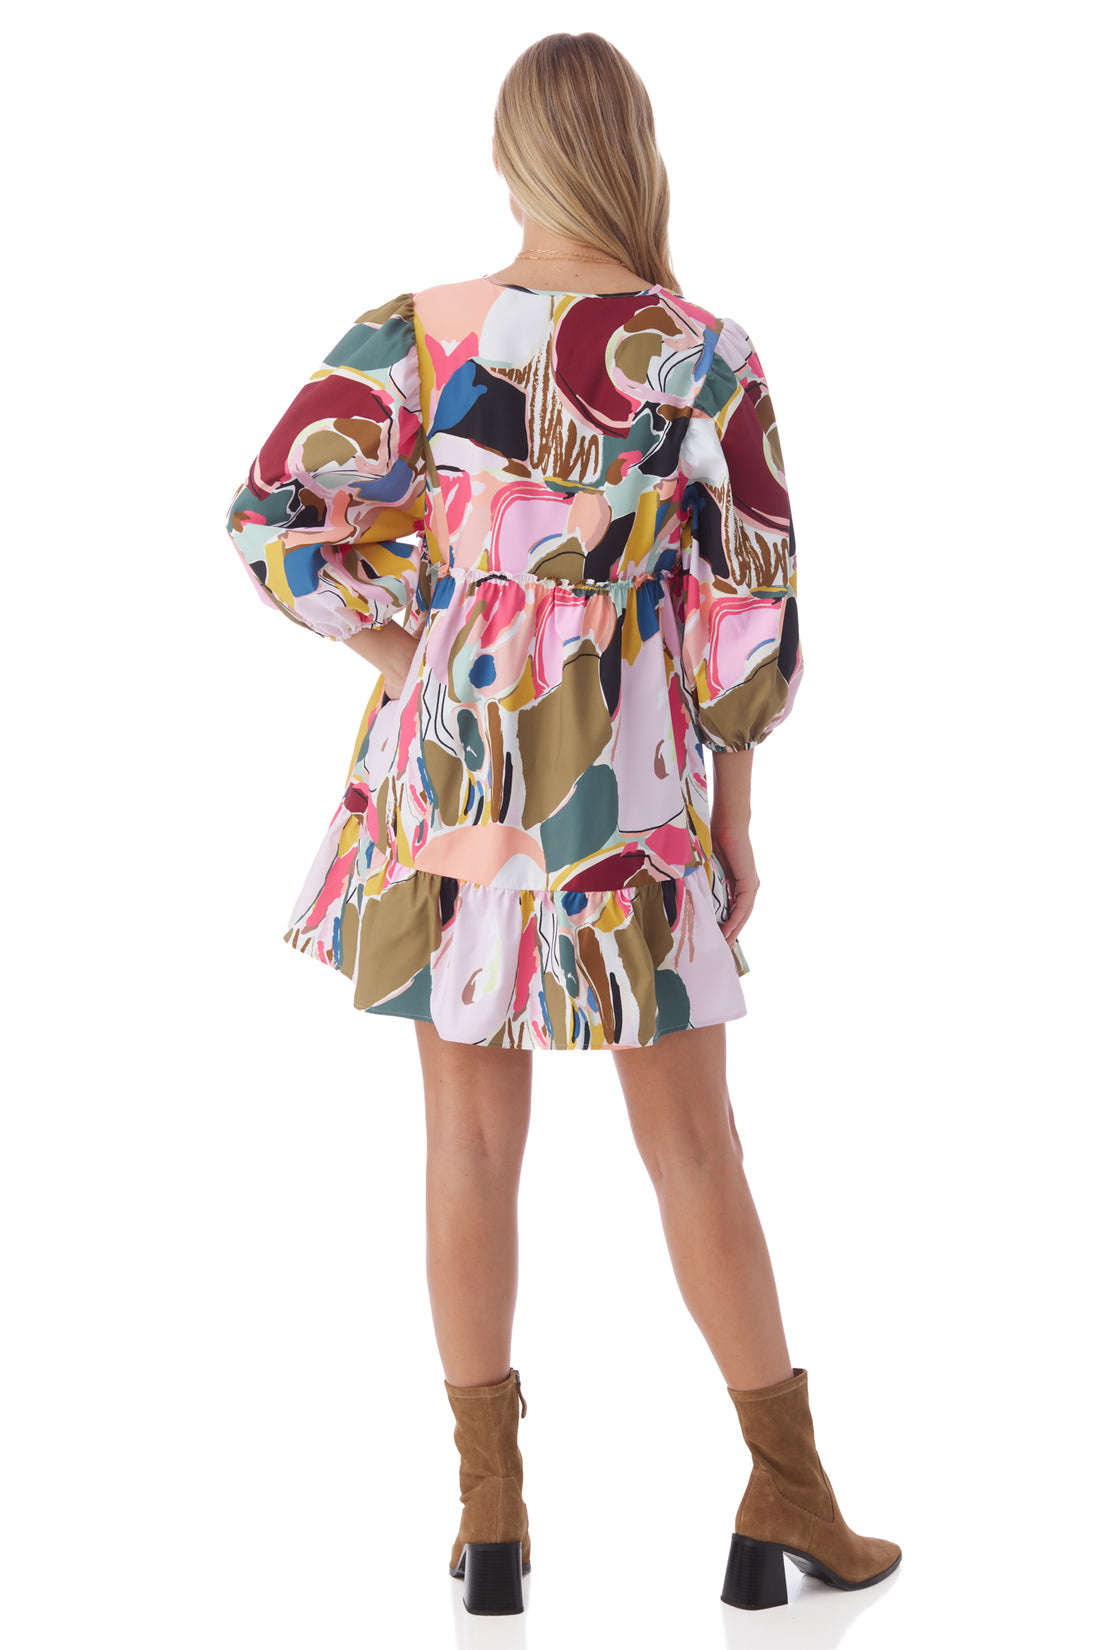 Crosby By Mollie Burch Addison Dress - Abstract Expression